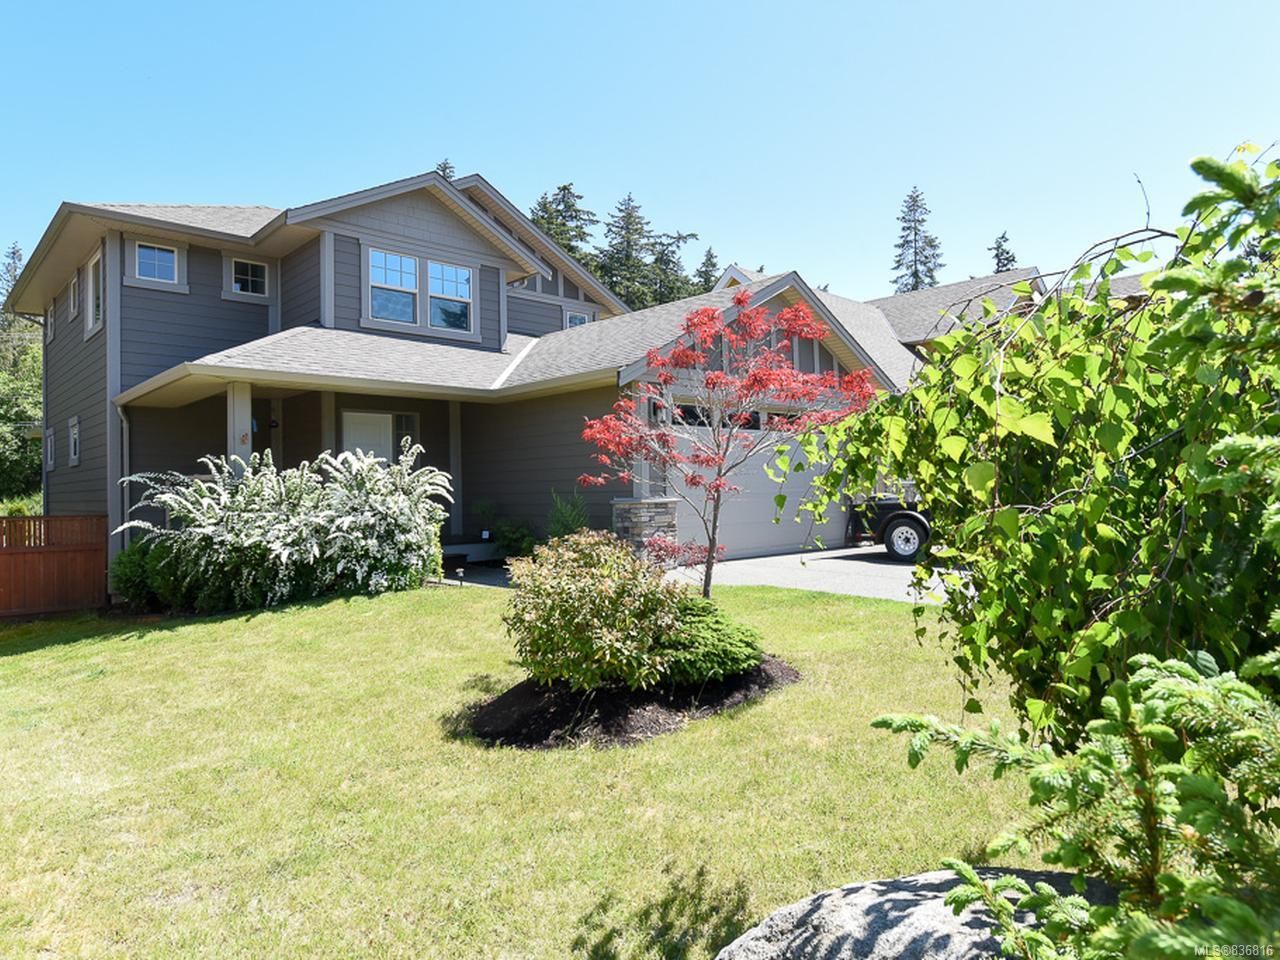 Main Photo: 350 Forester Ave in COMOX: CV Comox (Town of) House for sale (Comox Valley)  : MLS®# 836816